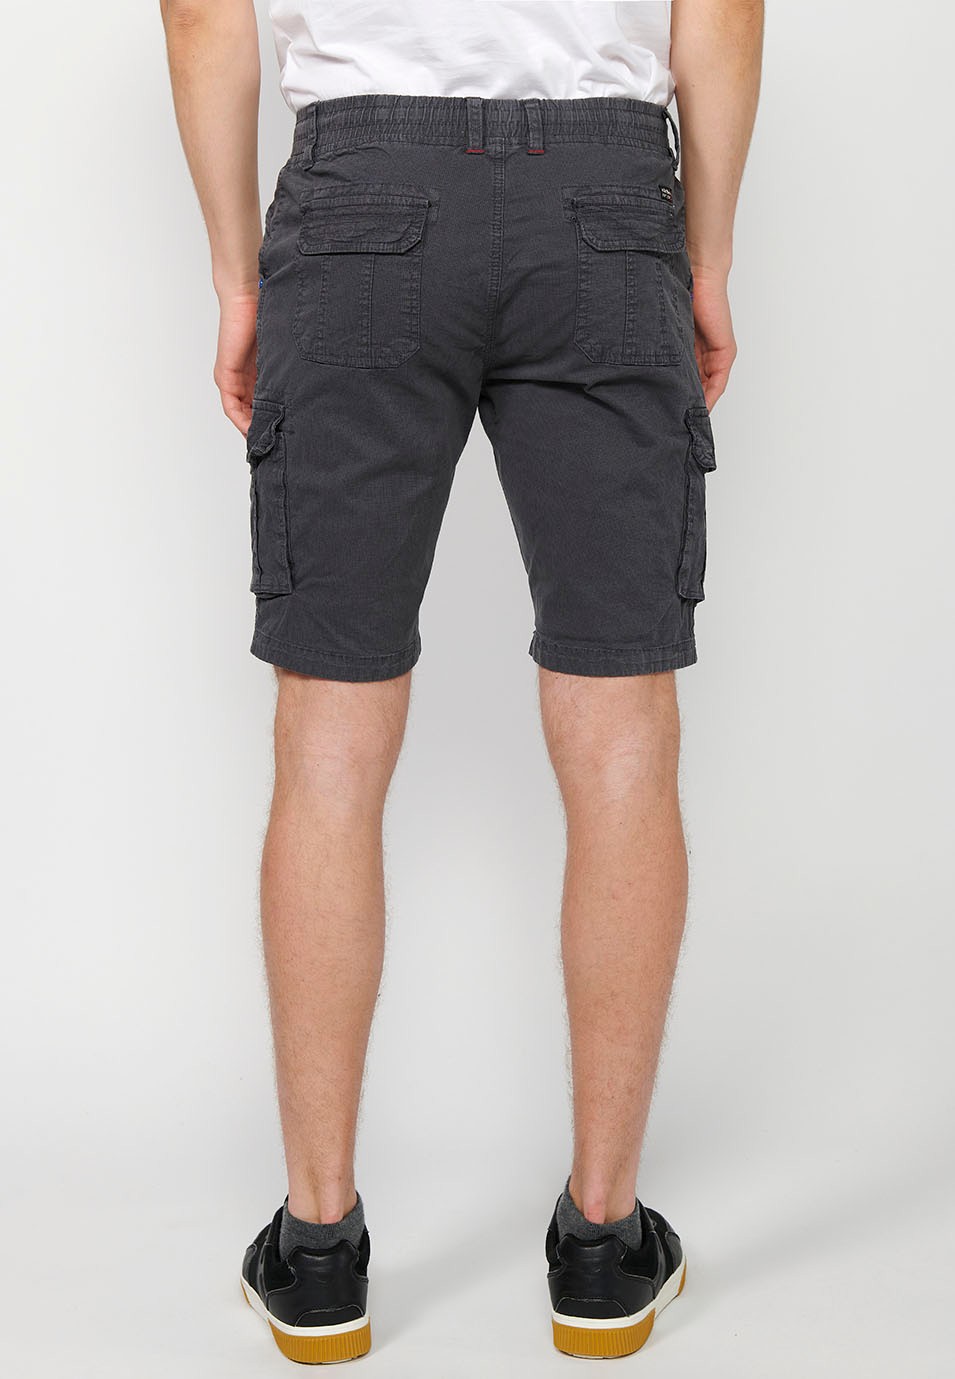 Cargo shorts with front closure with zipper and button and four pockets, two rear pockets with flap with two cargo pockets with flap and adjustable waist with drawstring in Gray for Men 4